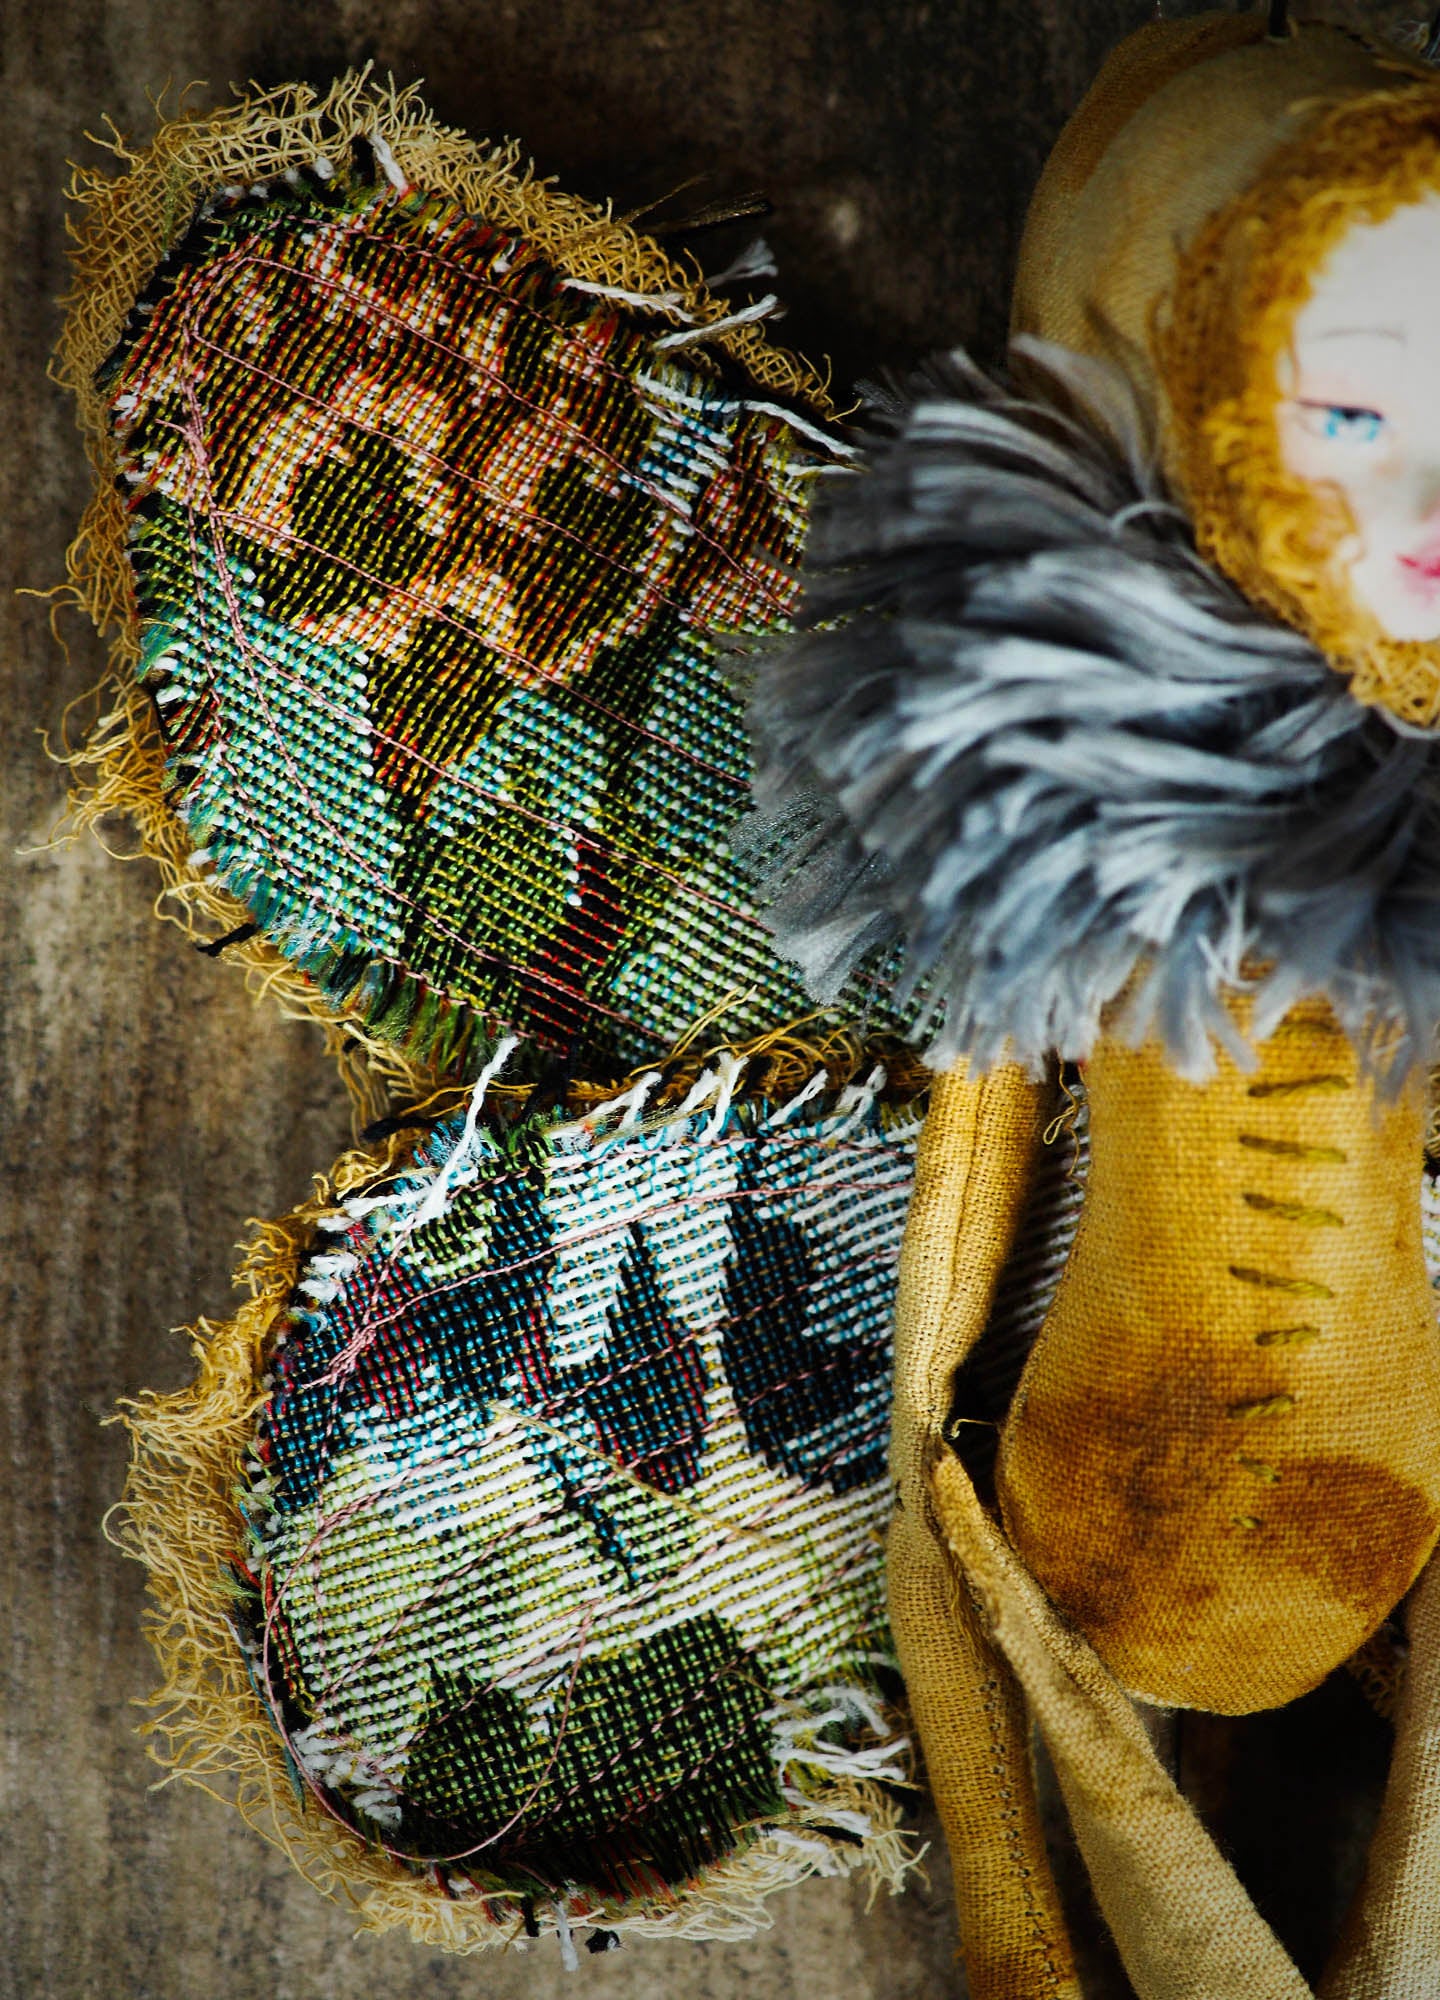 Inspired by nature, Danita created a handmade art doll moth, or night butterfly using organic materials like vintage and hand dyed fabric, wire and clay on a melancholic articulated soft sculpture. An art doll toy that celebrates nature's creations and the beautiful wings of insects with a bit of magic fairy on them.